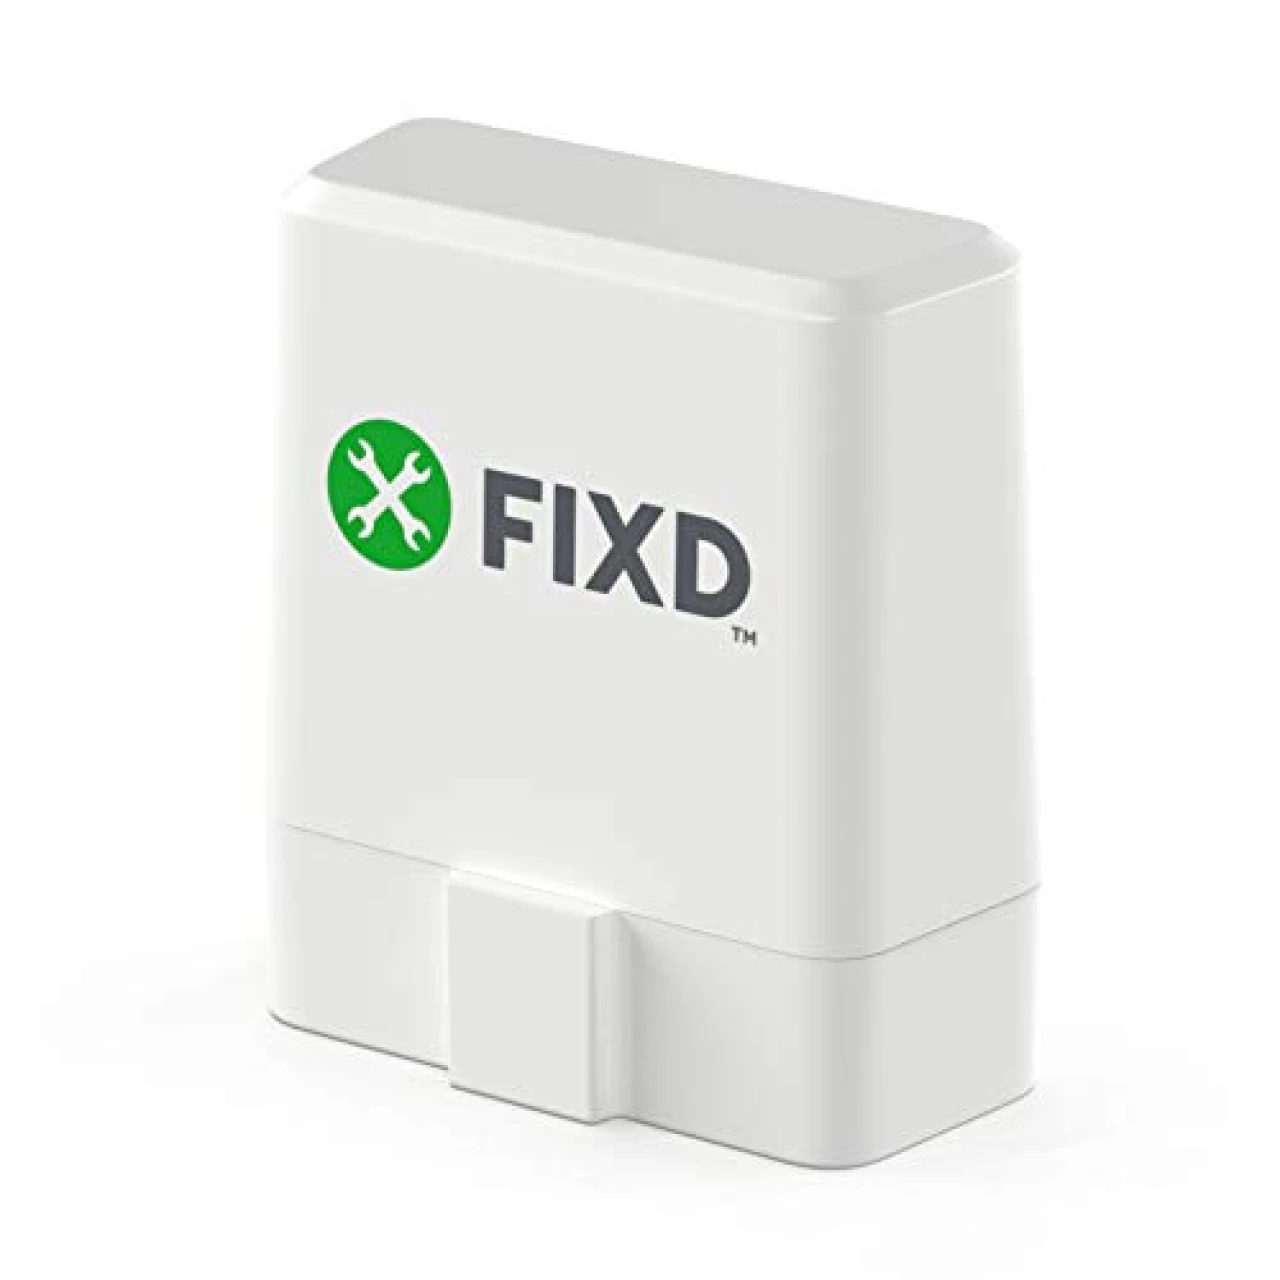 FIXD Bluetooth OBD2 Scanner for Car - Car Code Readers &amp; Scan Tools for iPhone &amp; Android (1 Pack)